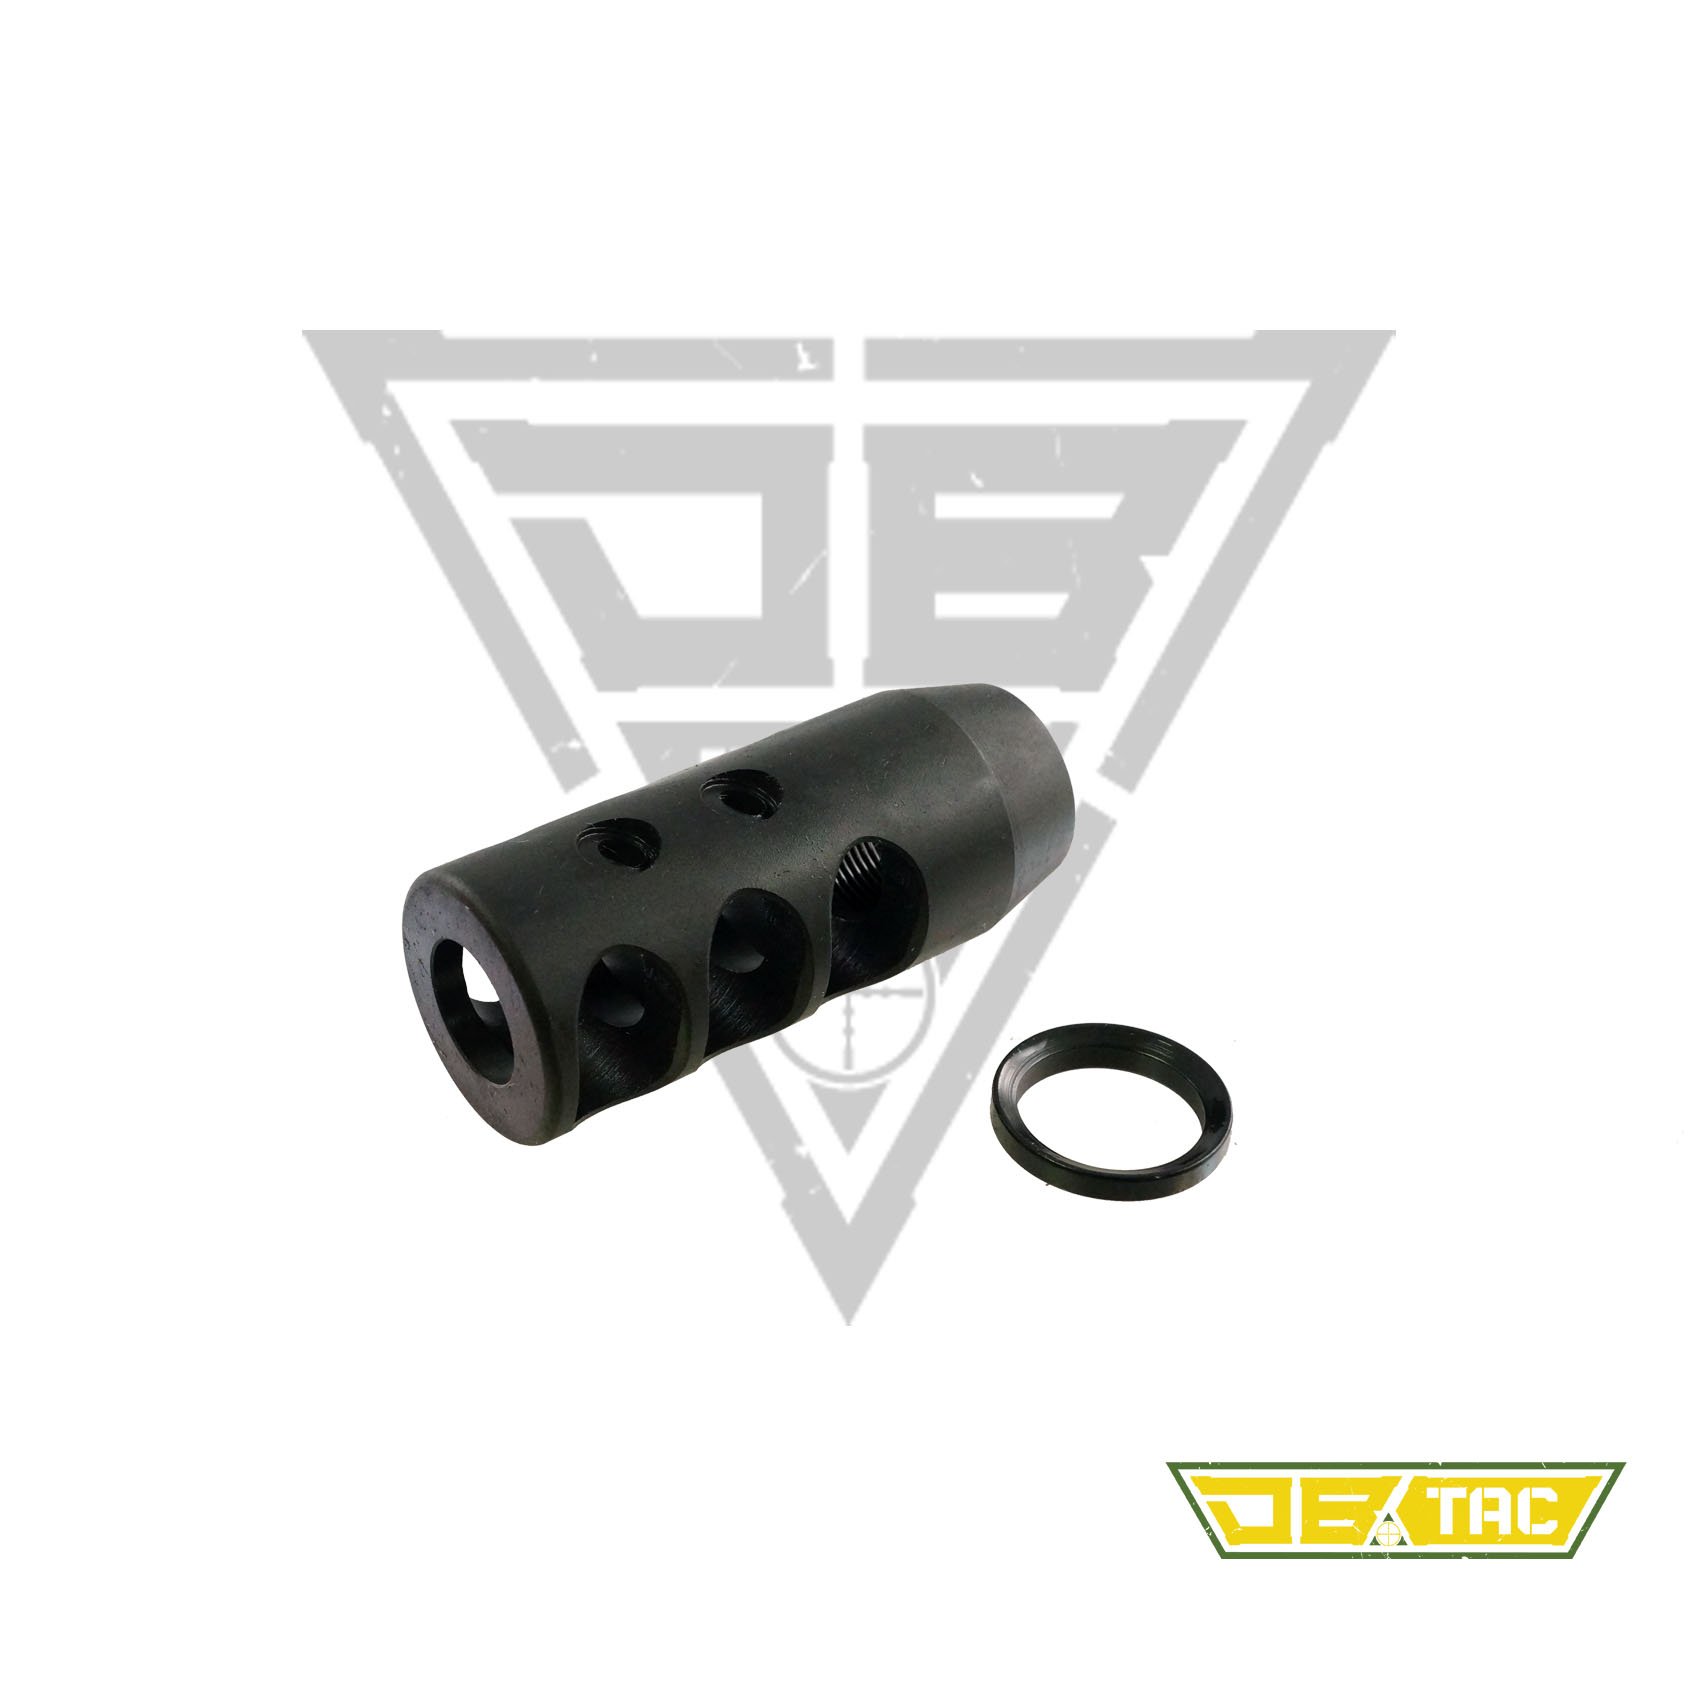 308 Competition Muzzle Brake 5/8"x24 TPI Thread With Crush Washer 